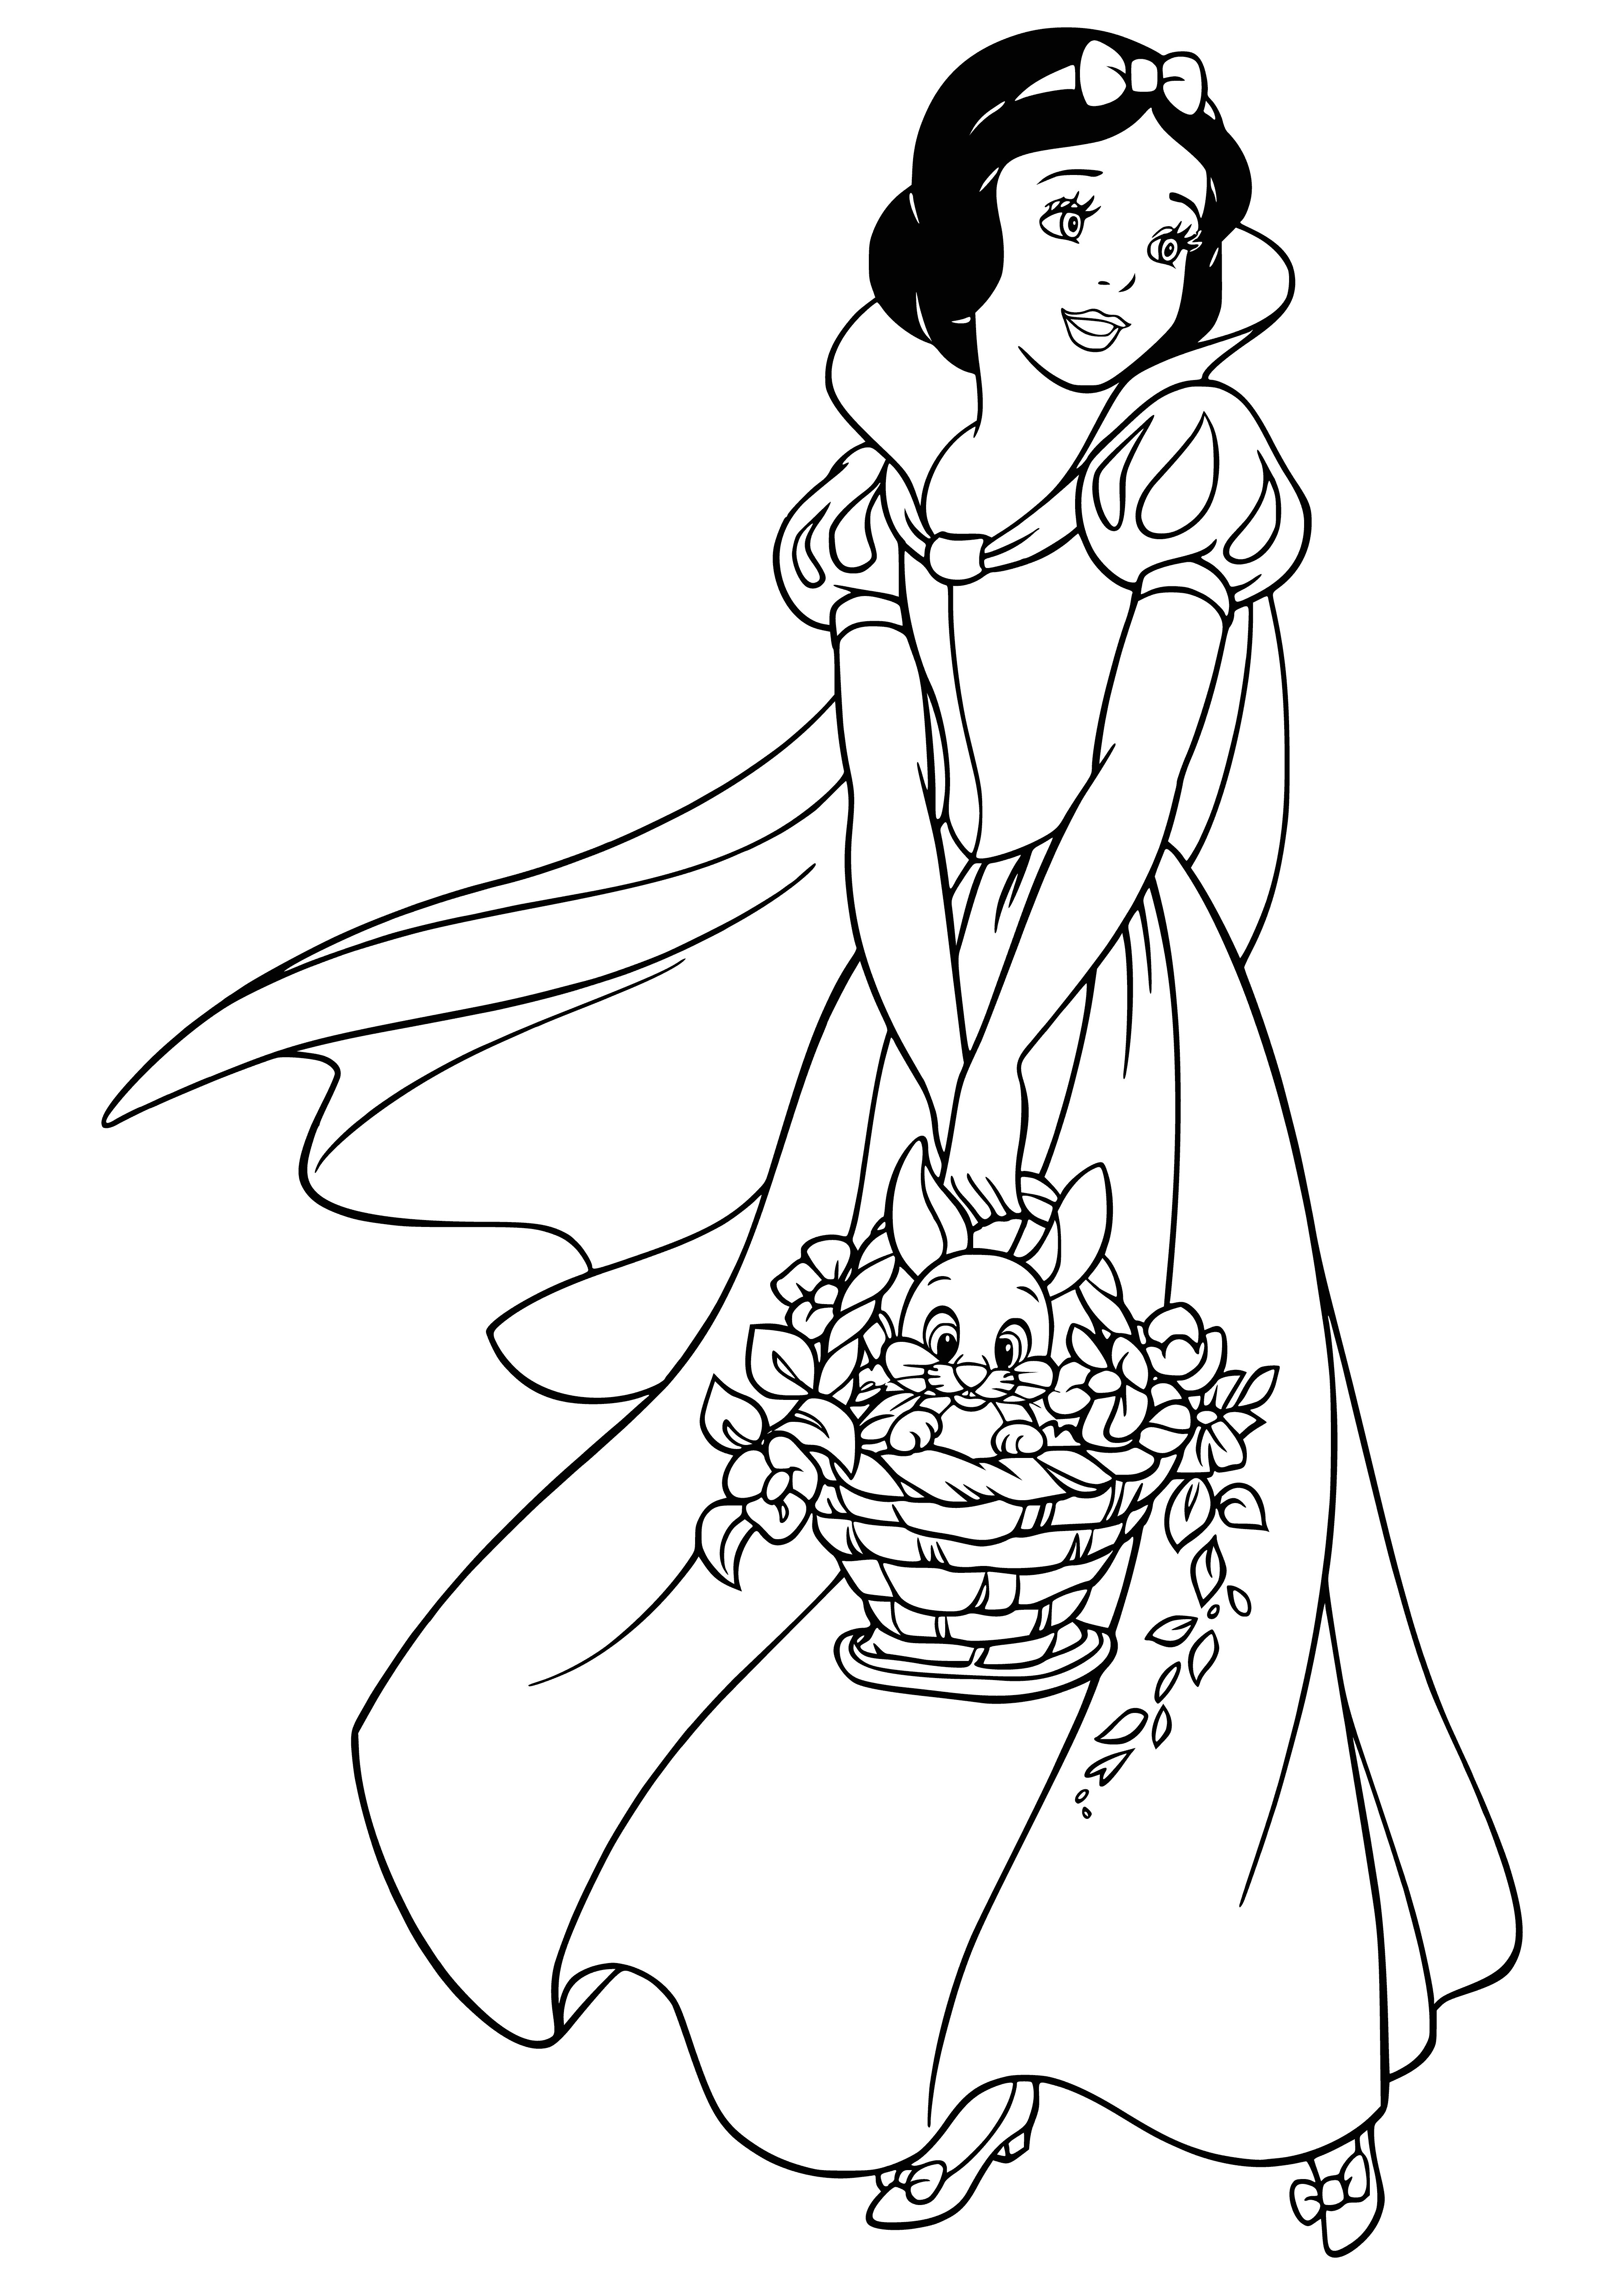 Snow white with a basket coloring page